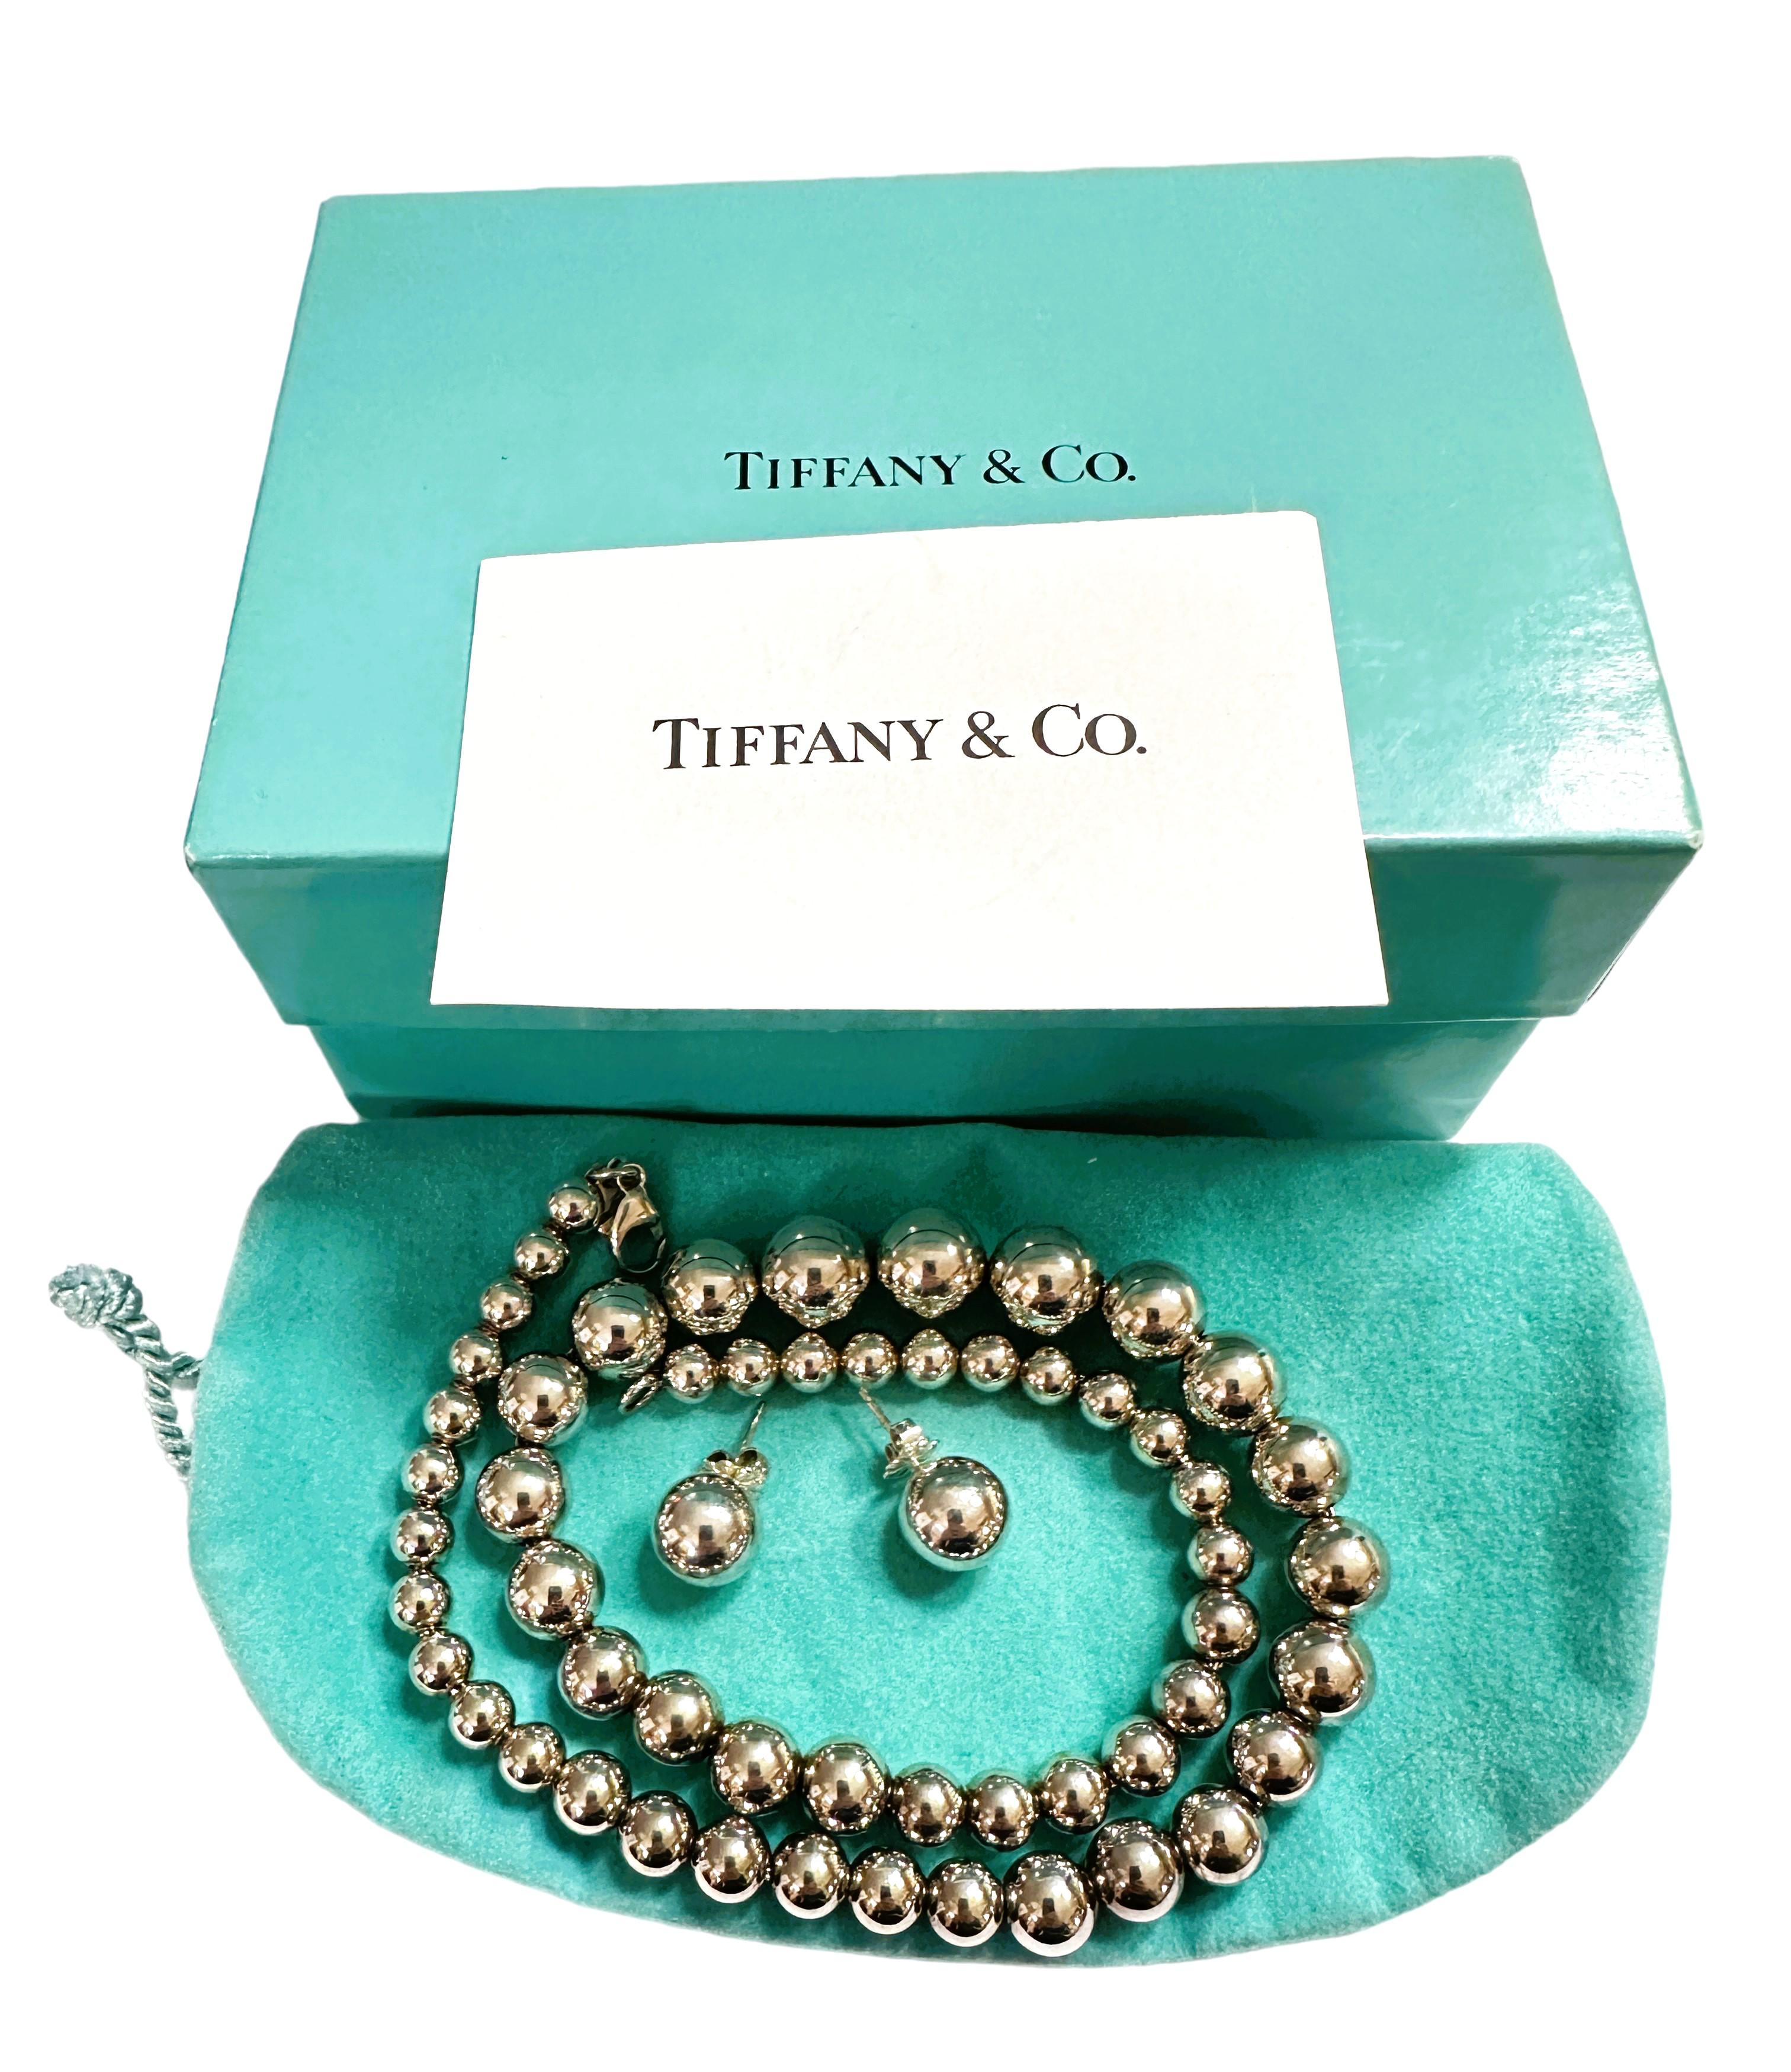 Tiffany & Co Sterling Silver Graduated Bead Necklace with Bead Earrings 1